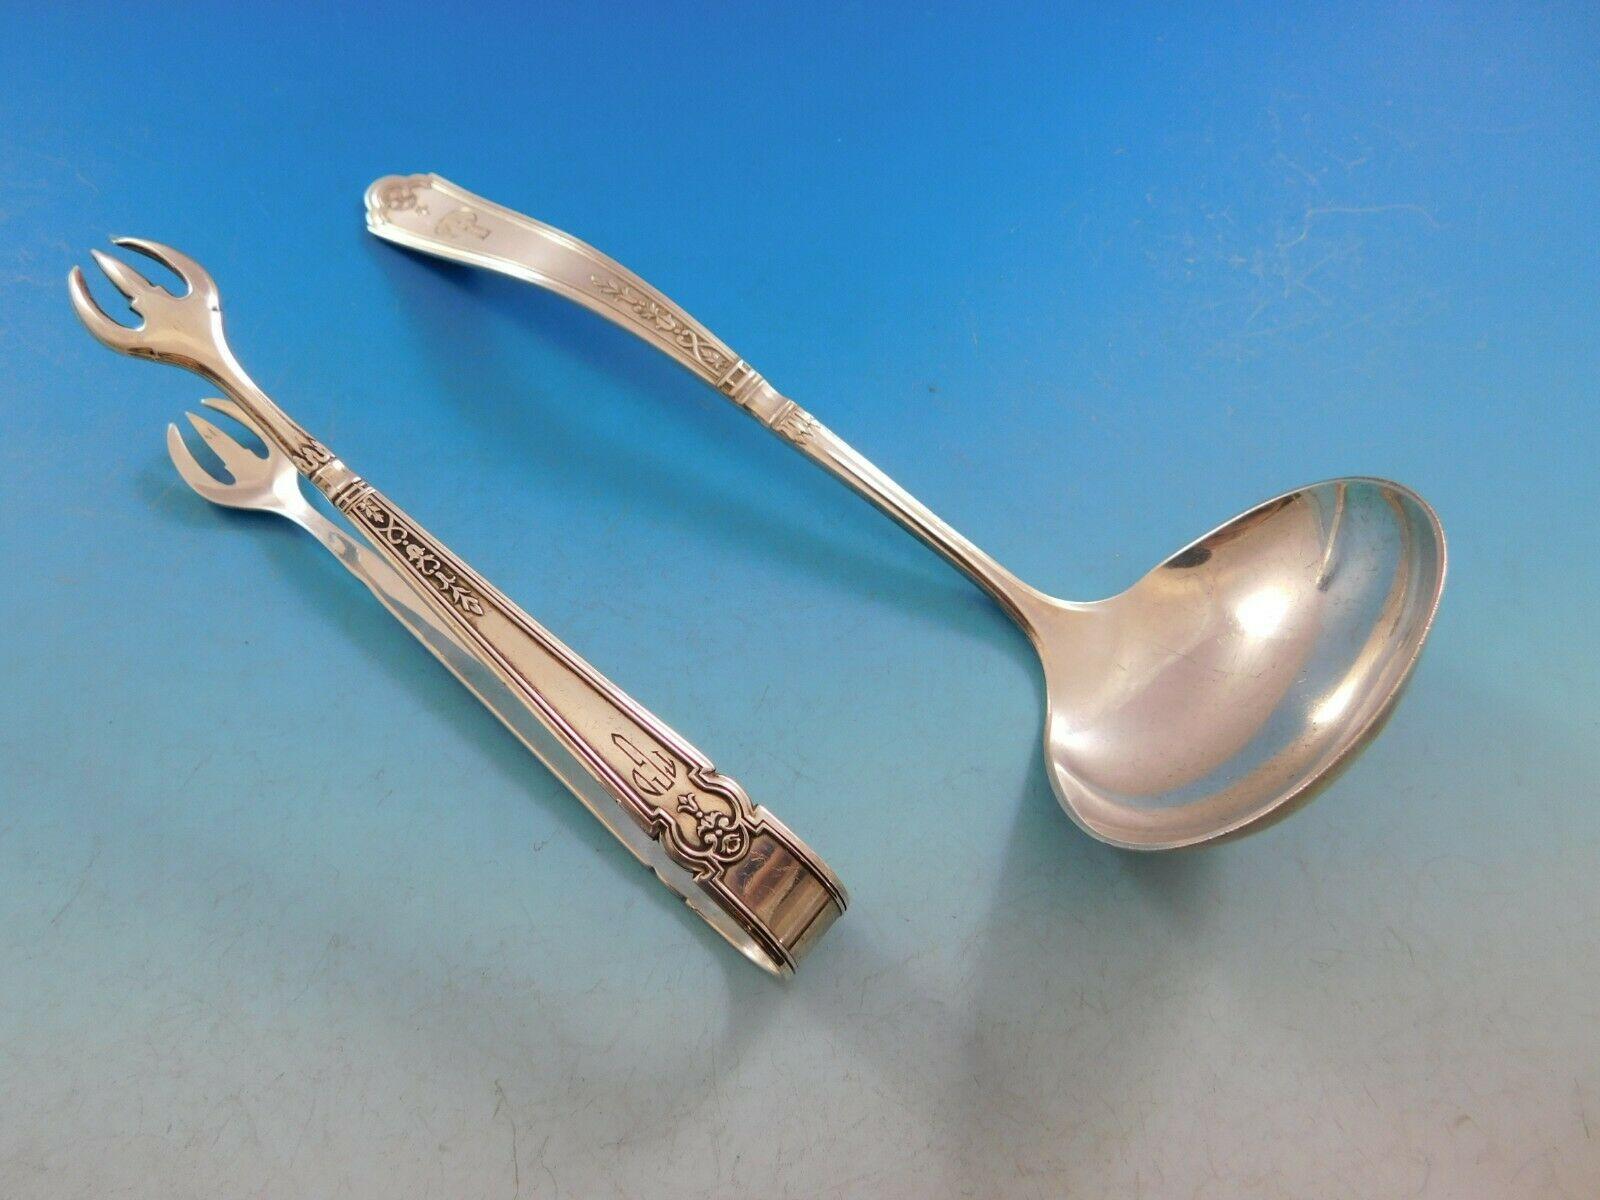 Buttercup by Gorham Sterling Silver Sugar Tong 4 1/4" Heirloom Serving 